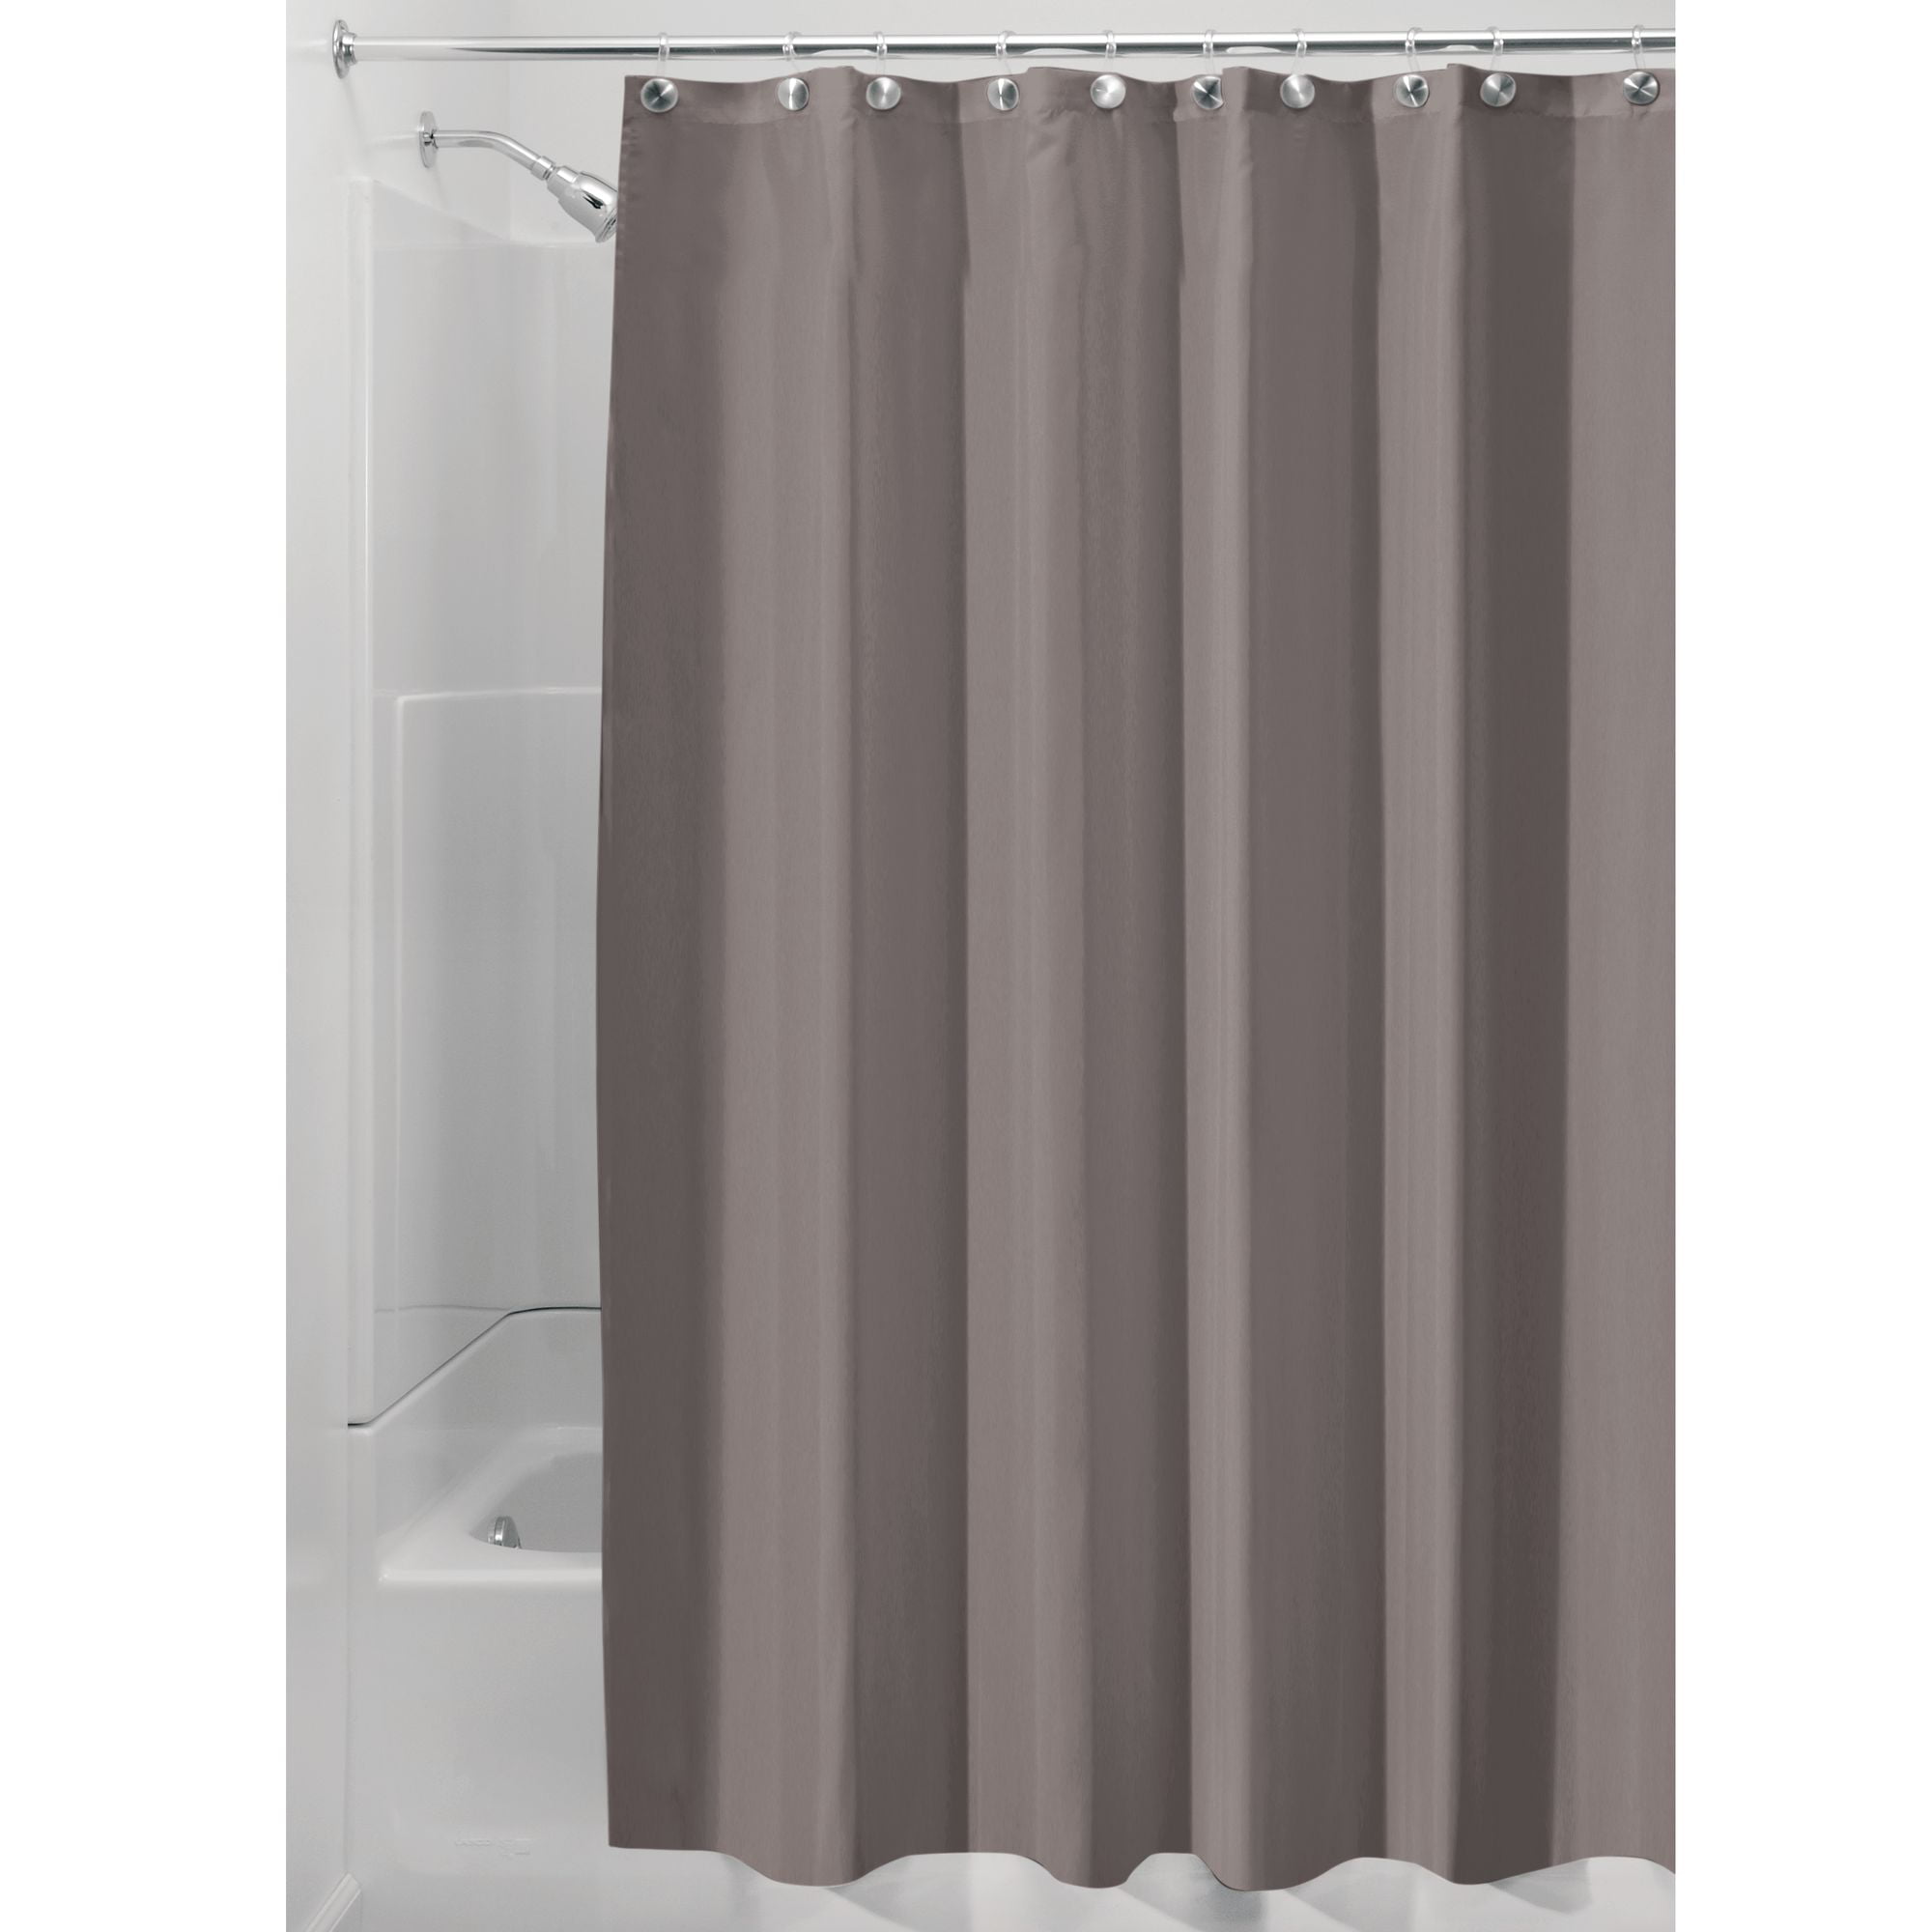 InterDesign Mildew-Free Water-Repellent Fabric Shower Curtain 72-Inch by 